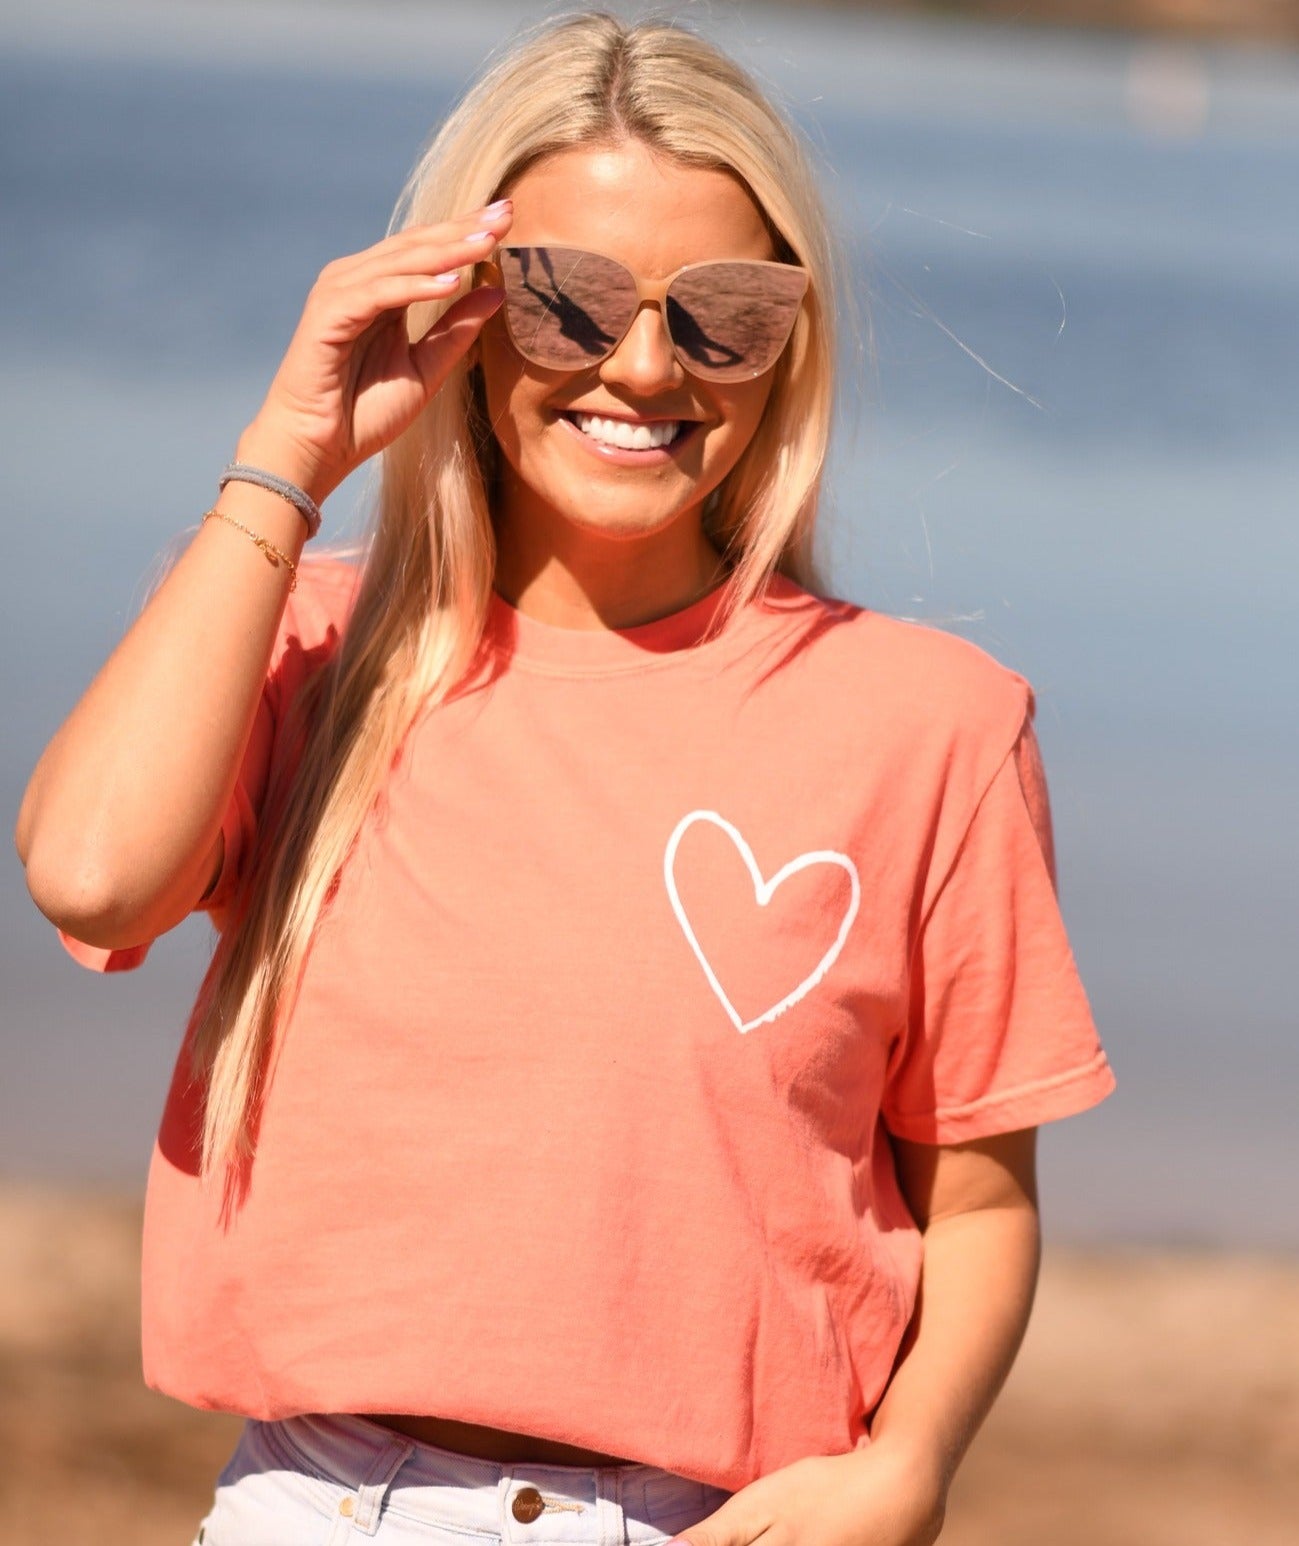 Dear Person Behind Me Tee - Comfort Colors - Bright Salmon-Apparel-LouisGeorge Boutique-LouisGeorge Boutique, Women’s Fashion Boutique Located in Trussville, Alabama